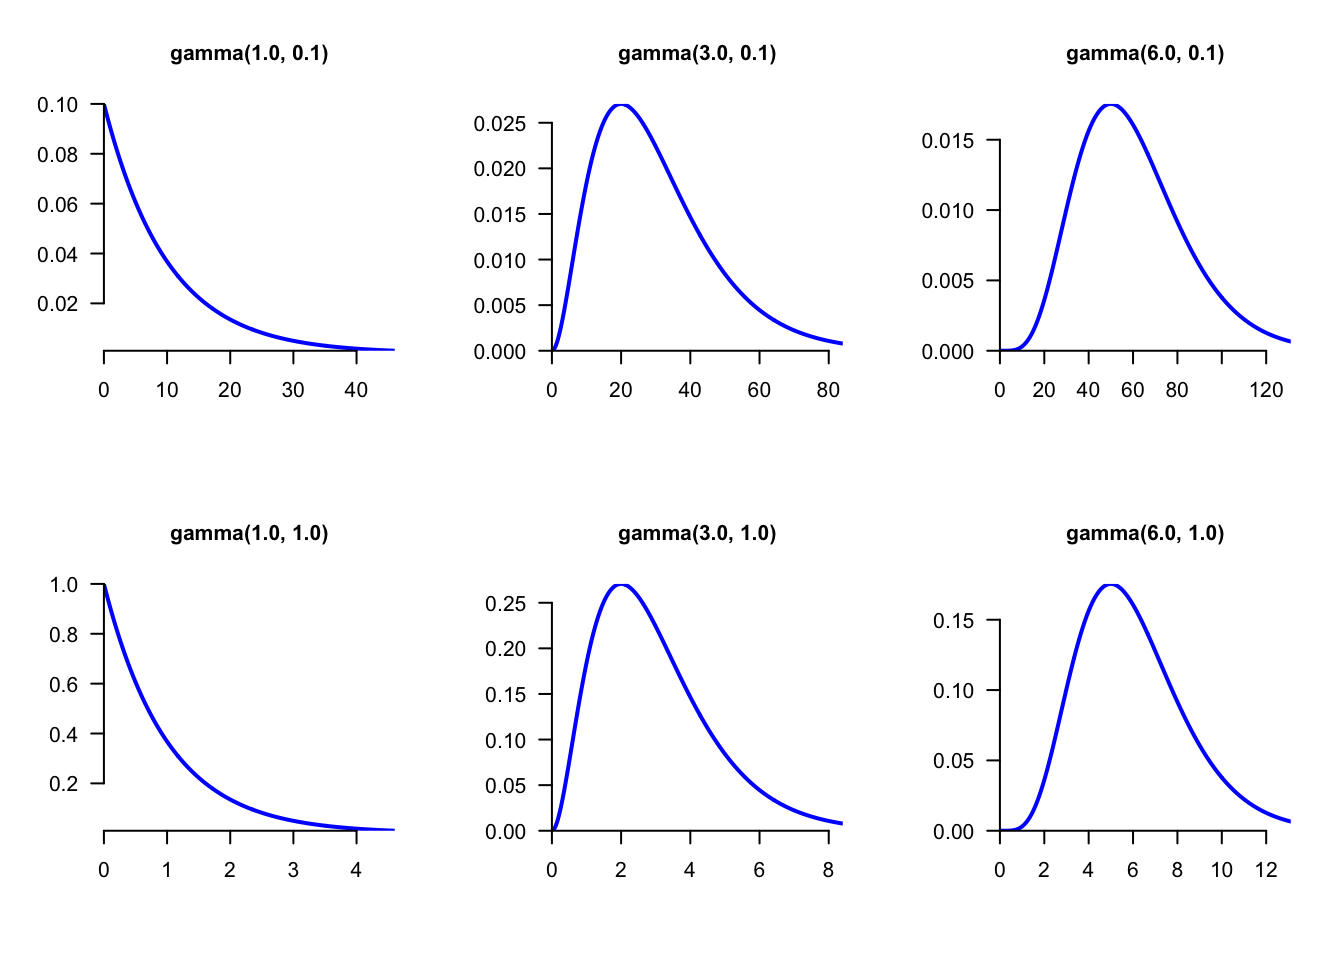 The distribution gamma(\(\alpha\),\(\theta\)) for different values of \(\alpha\) and \(\theta\). The shape argument \(\alpha\) determines the overall shape while the scale parameter \(\theta\) only affects the scale values (compare the values on X- and Y-axes between the bottom and upper panels). The exponential and chi-square distributions are particular cases of the gamma distribution. If the parameter shape is close to zero, the gamma is very similar to the exponential (bottom and upper left panels). If the parameter shape is large, then the gamma is similar to the chi-squared distribution (bottom and upper right panels).